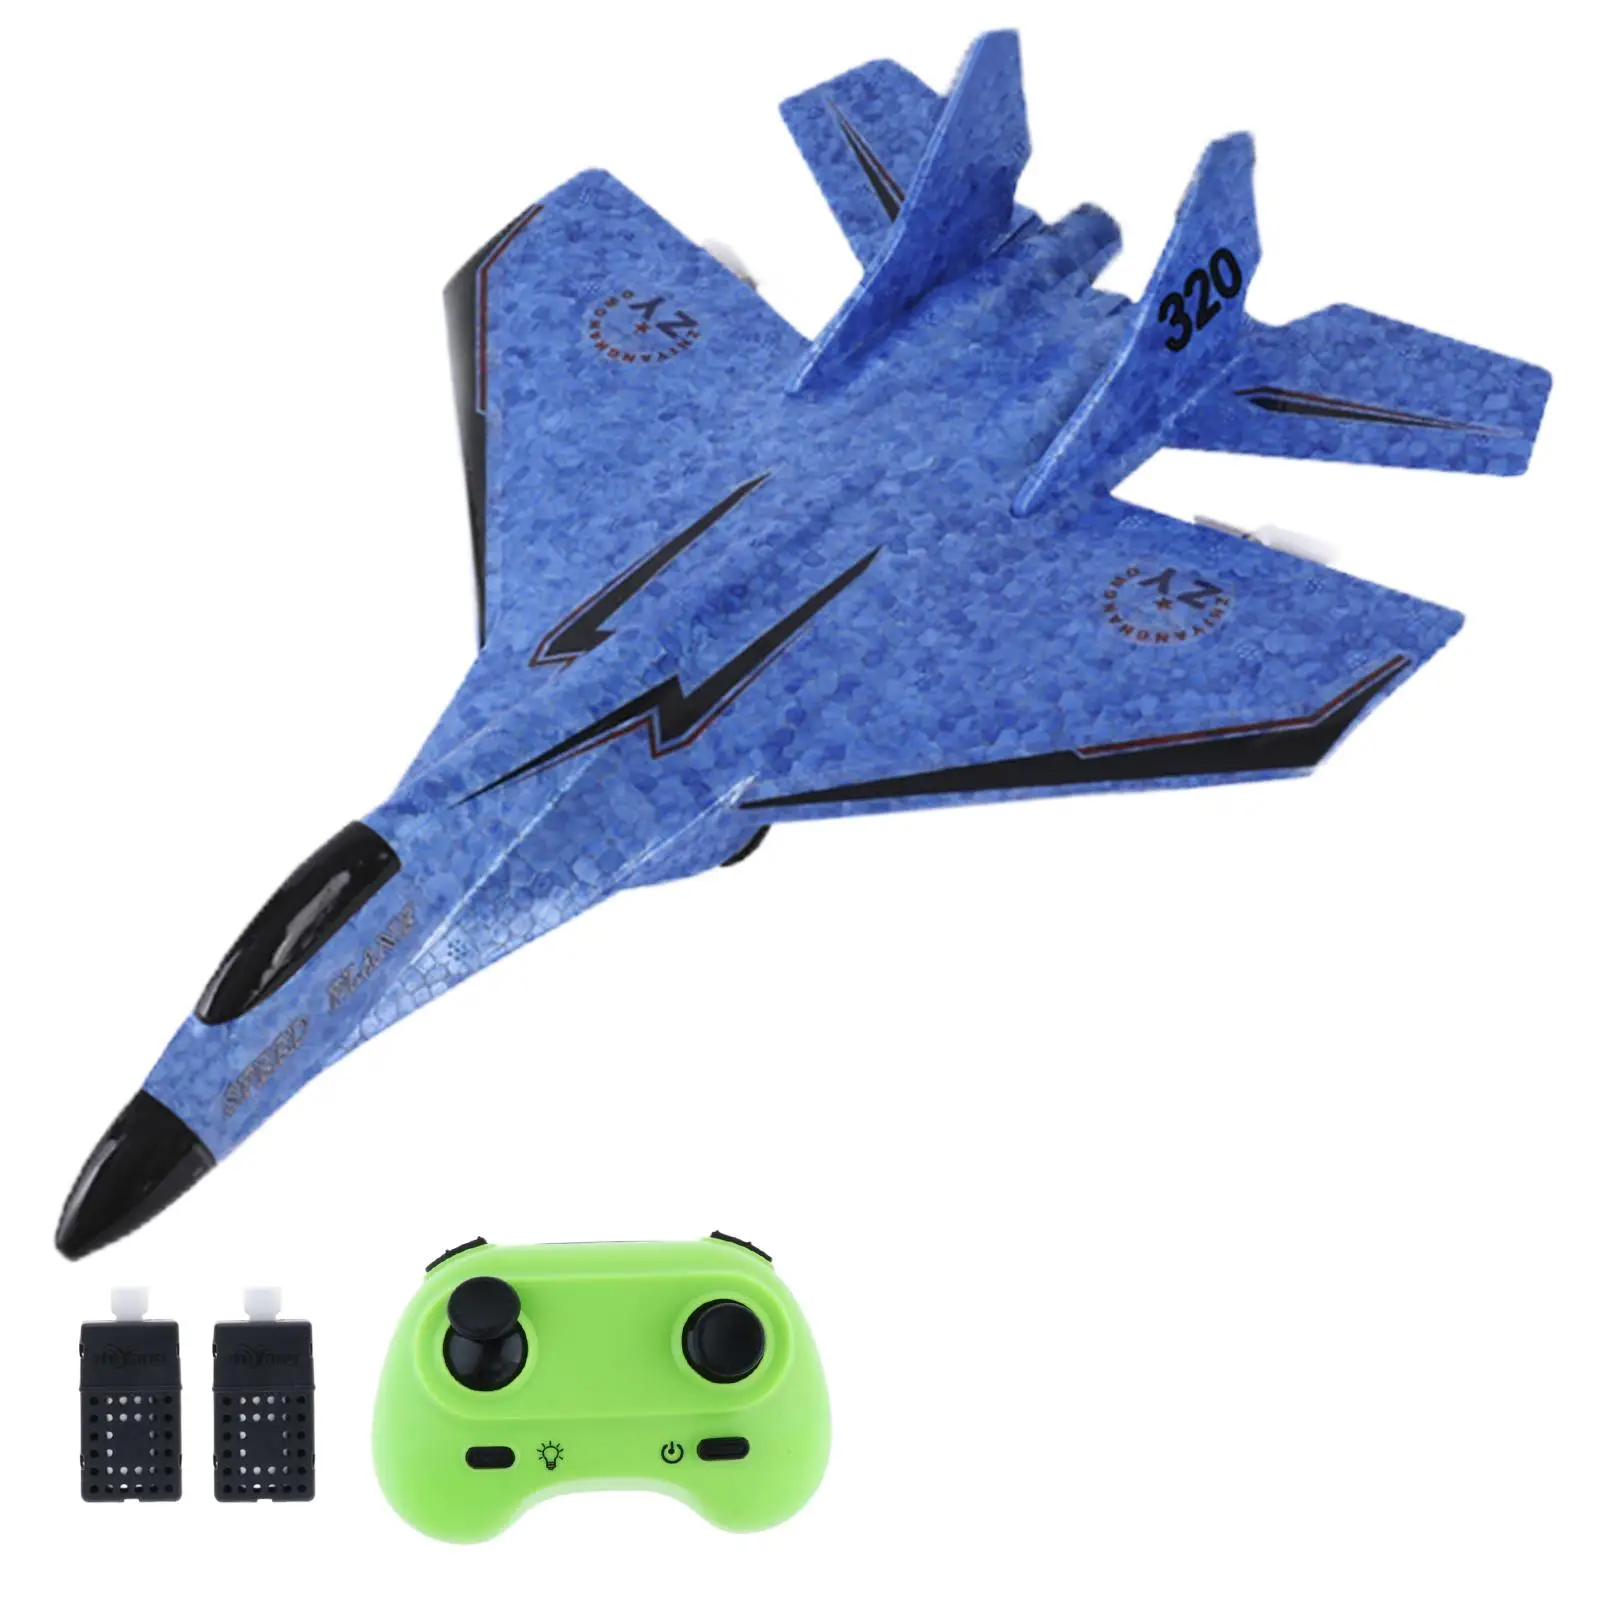 Foam Easy to Fly Channels Jet Fighter Fixed Wing Aircraft RC Glider Plane Birthday Gift Outdoor Toy for Kids and Adults